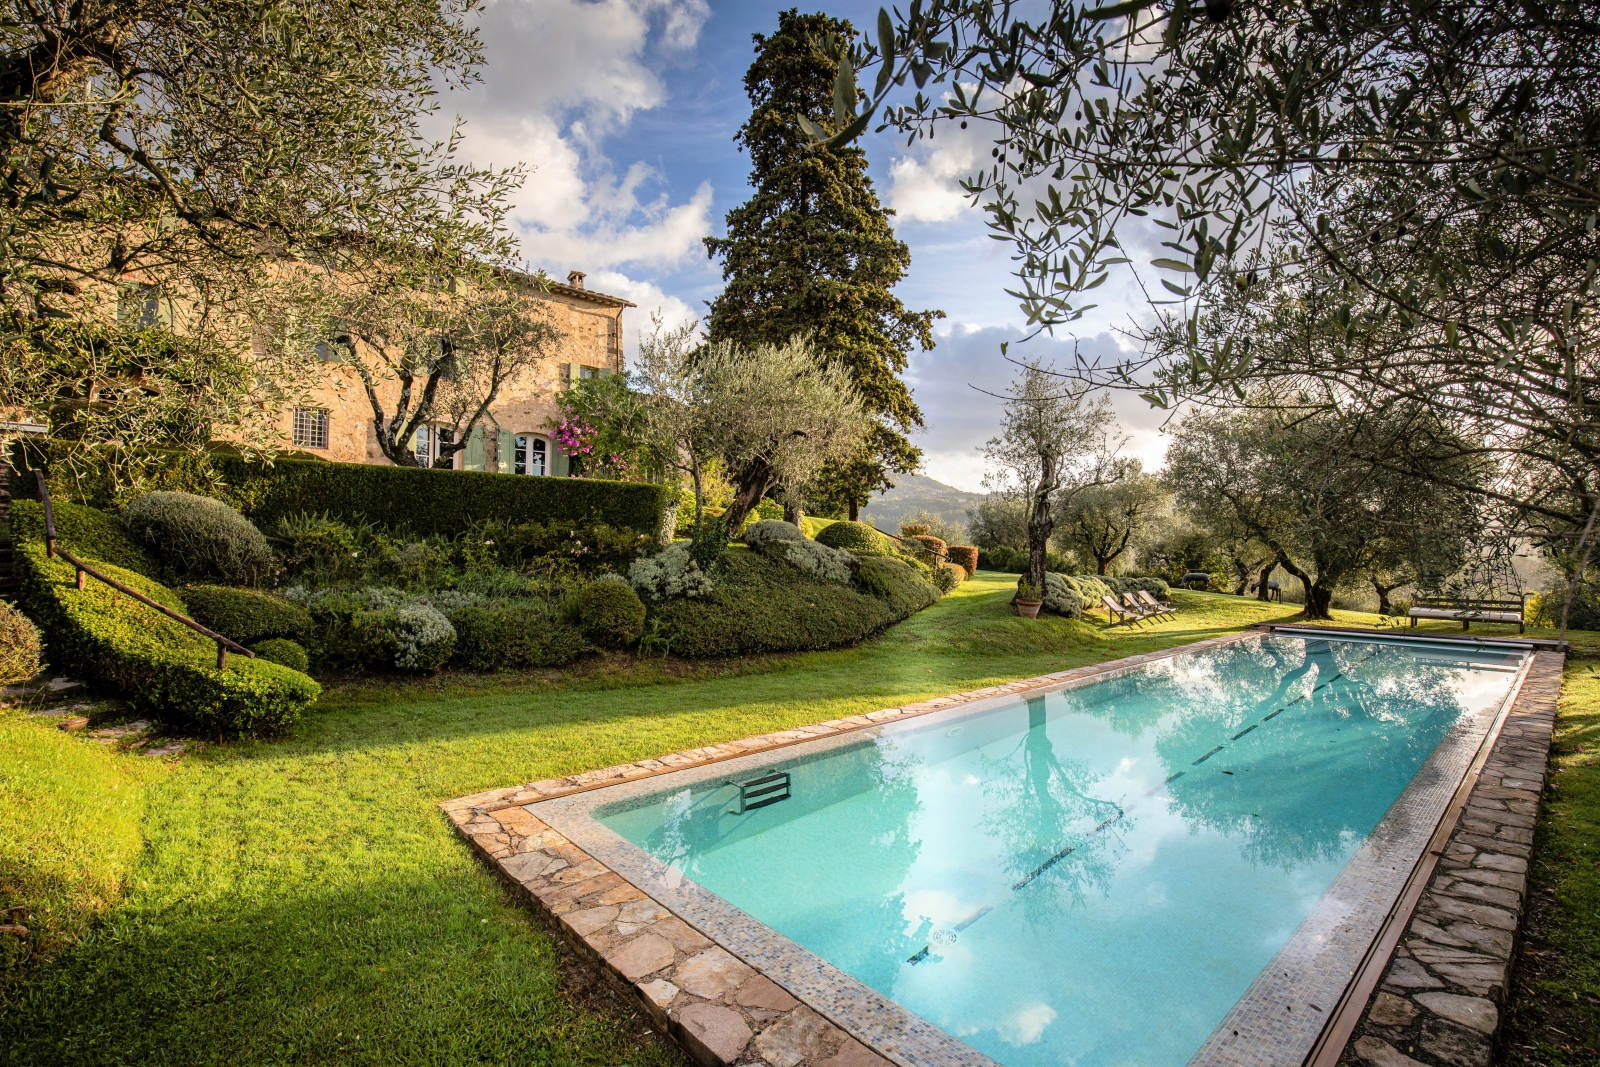 Pool and garden at Villa Ortensia, luxury villa in Lucca, Tuscany, Italy